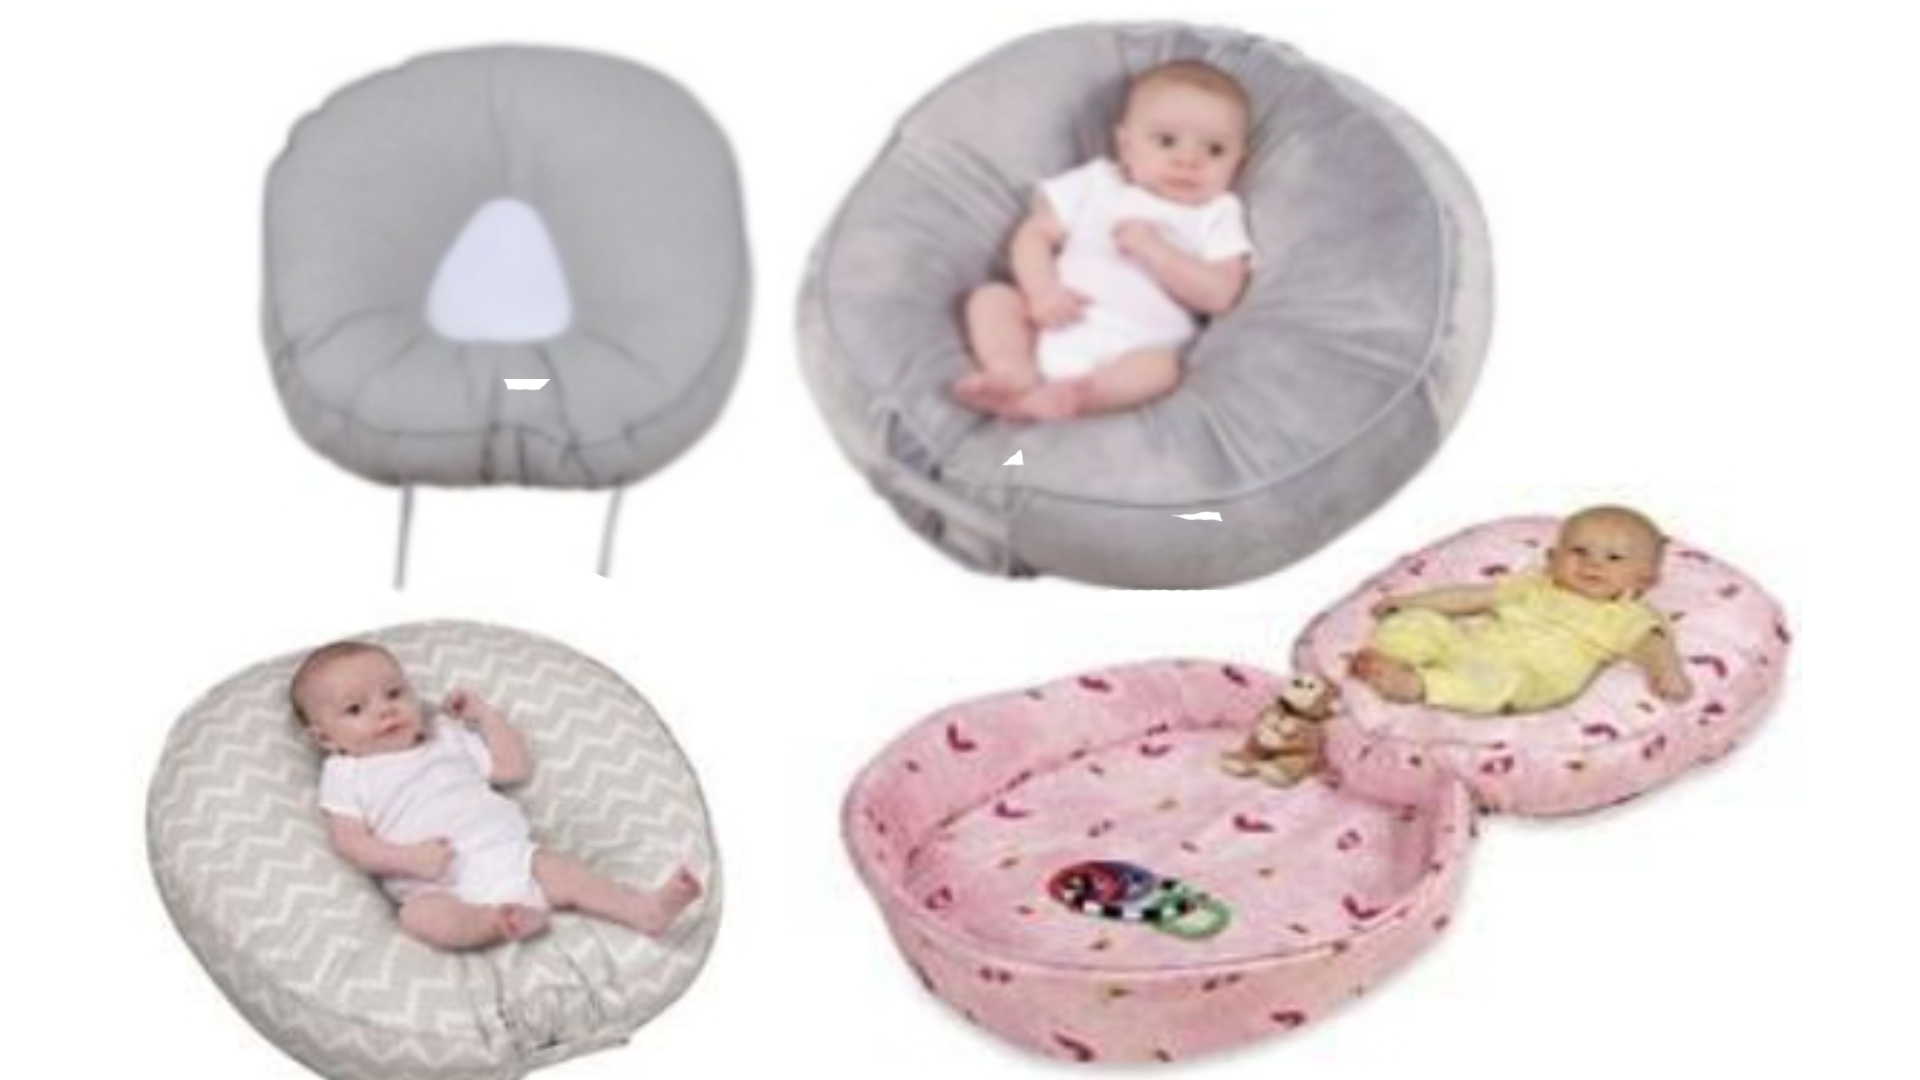 The Best Baby Lounger Is the Leacho Podster